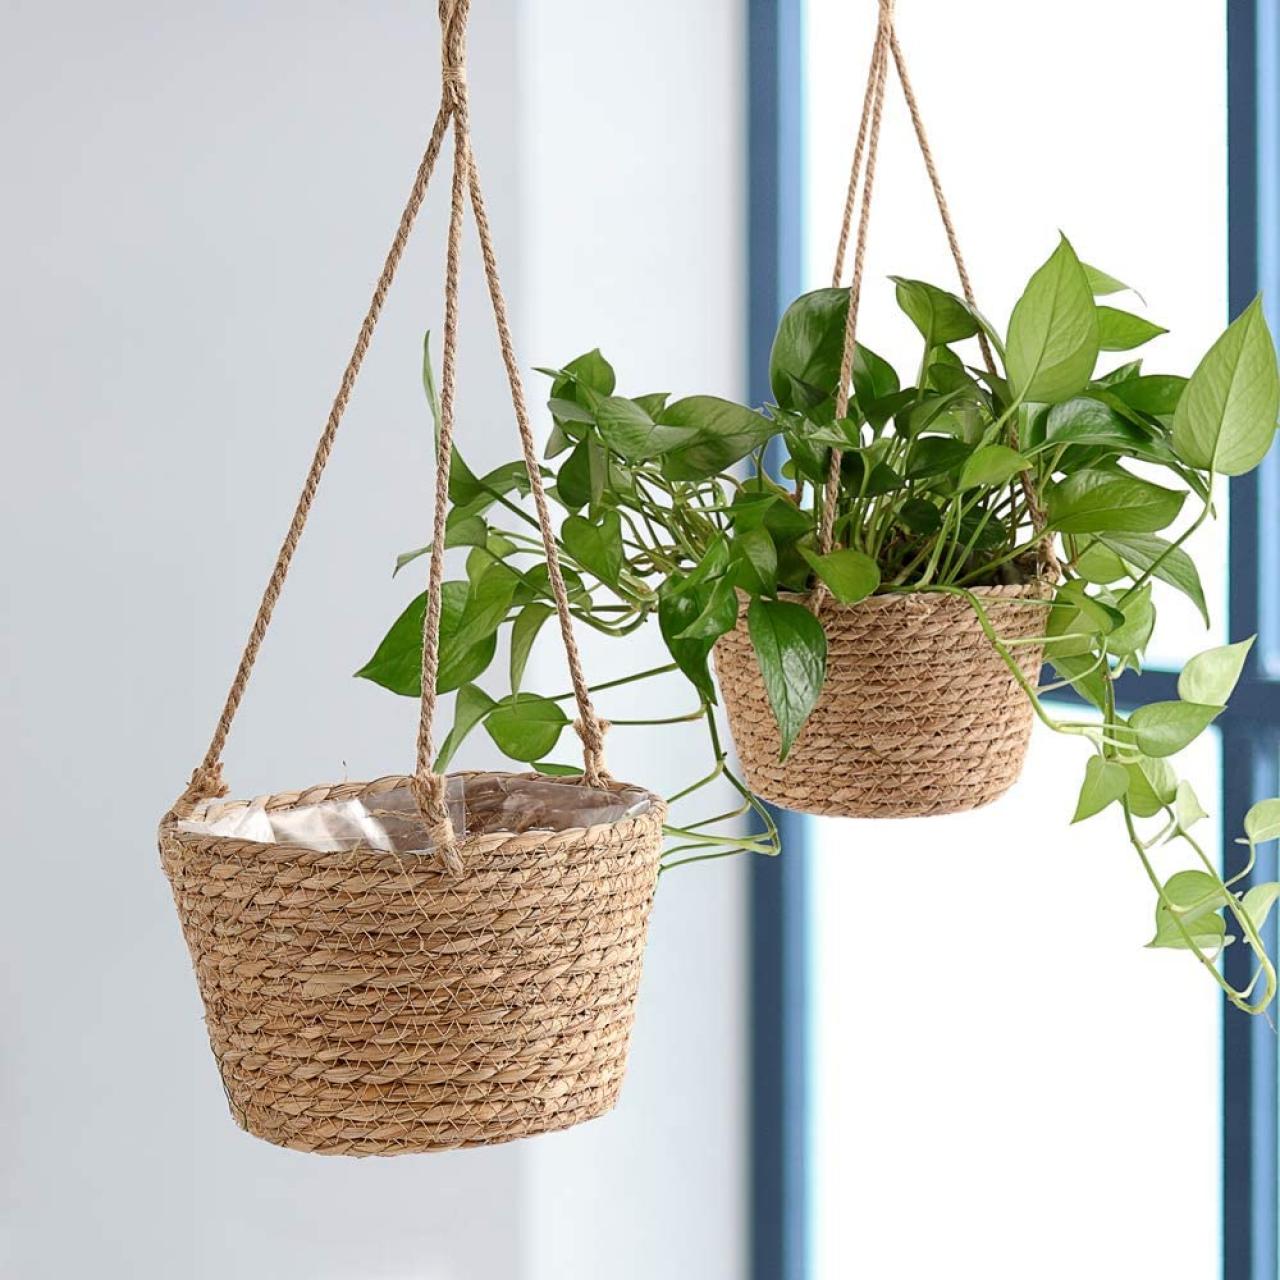 15 Superior Hanging Baskets For Plants for 2023